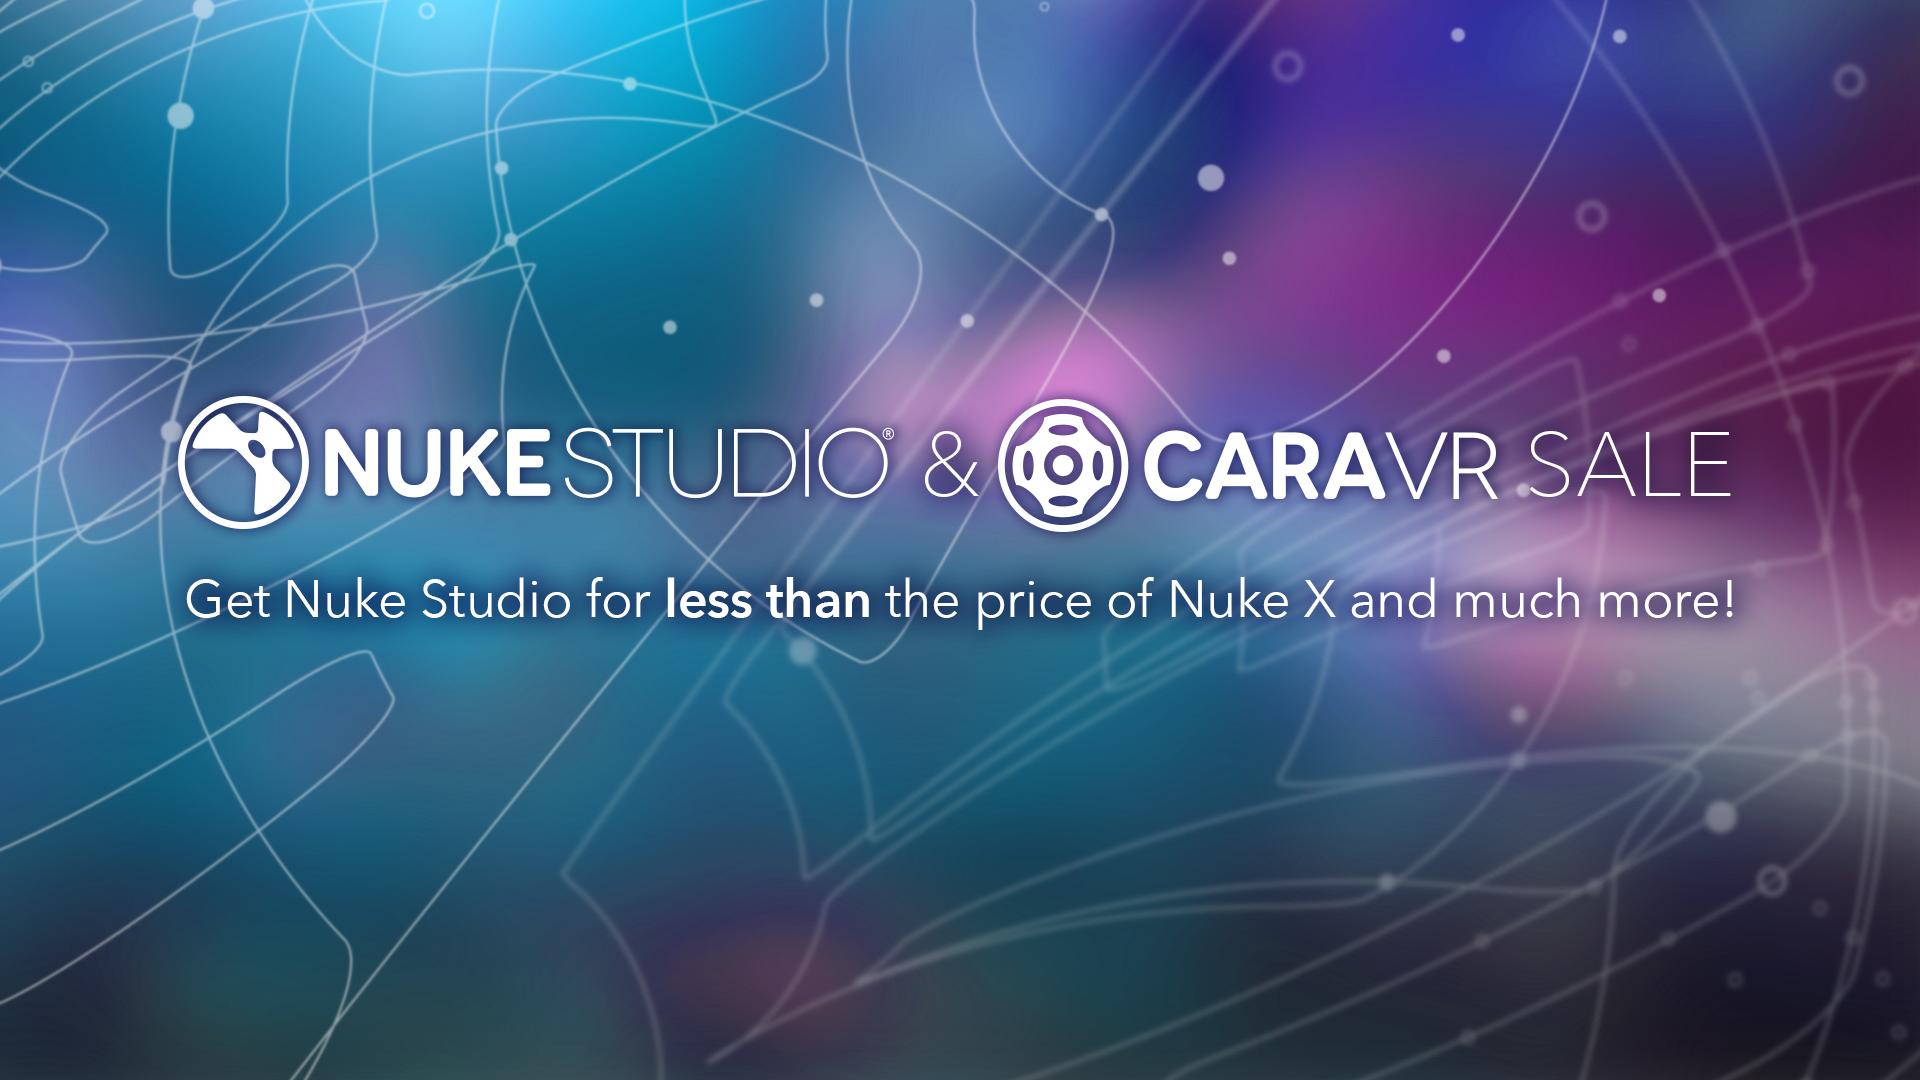 Cara VR and Nuke Studio discount promotion 